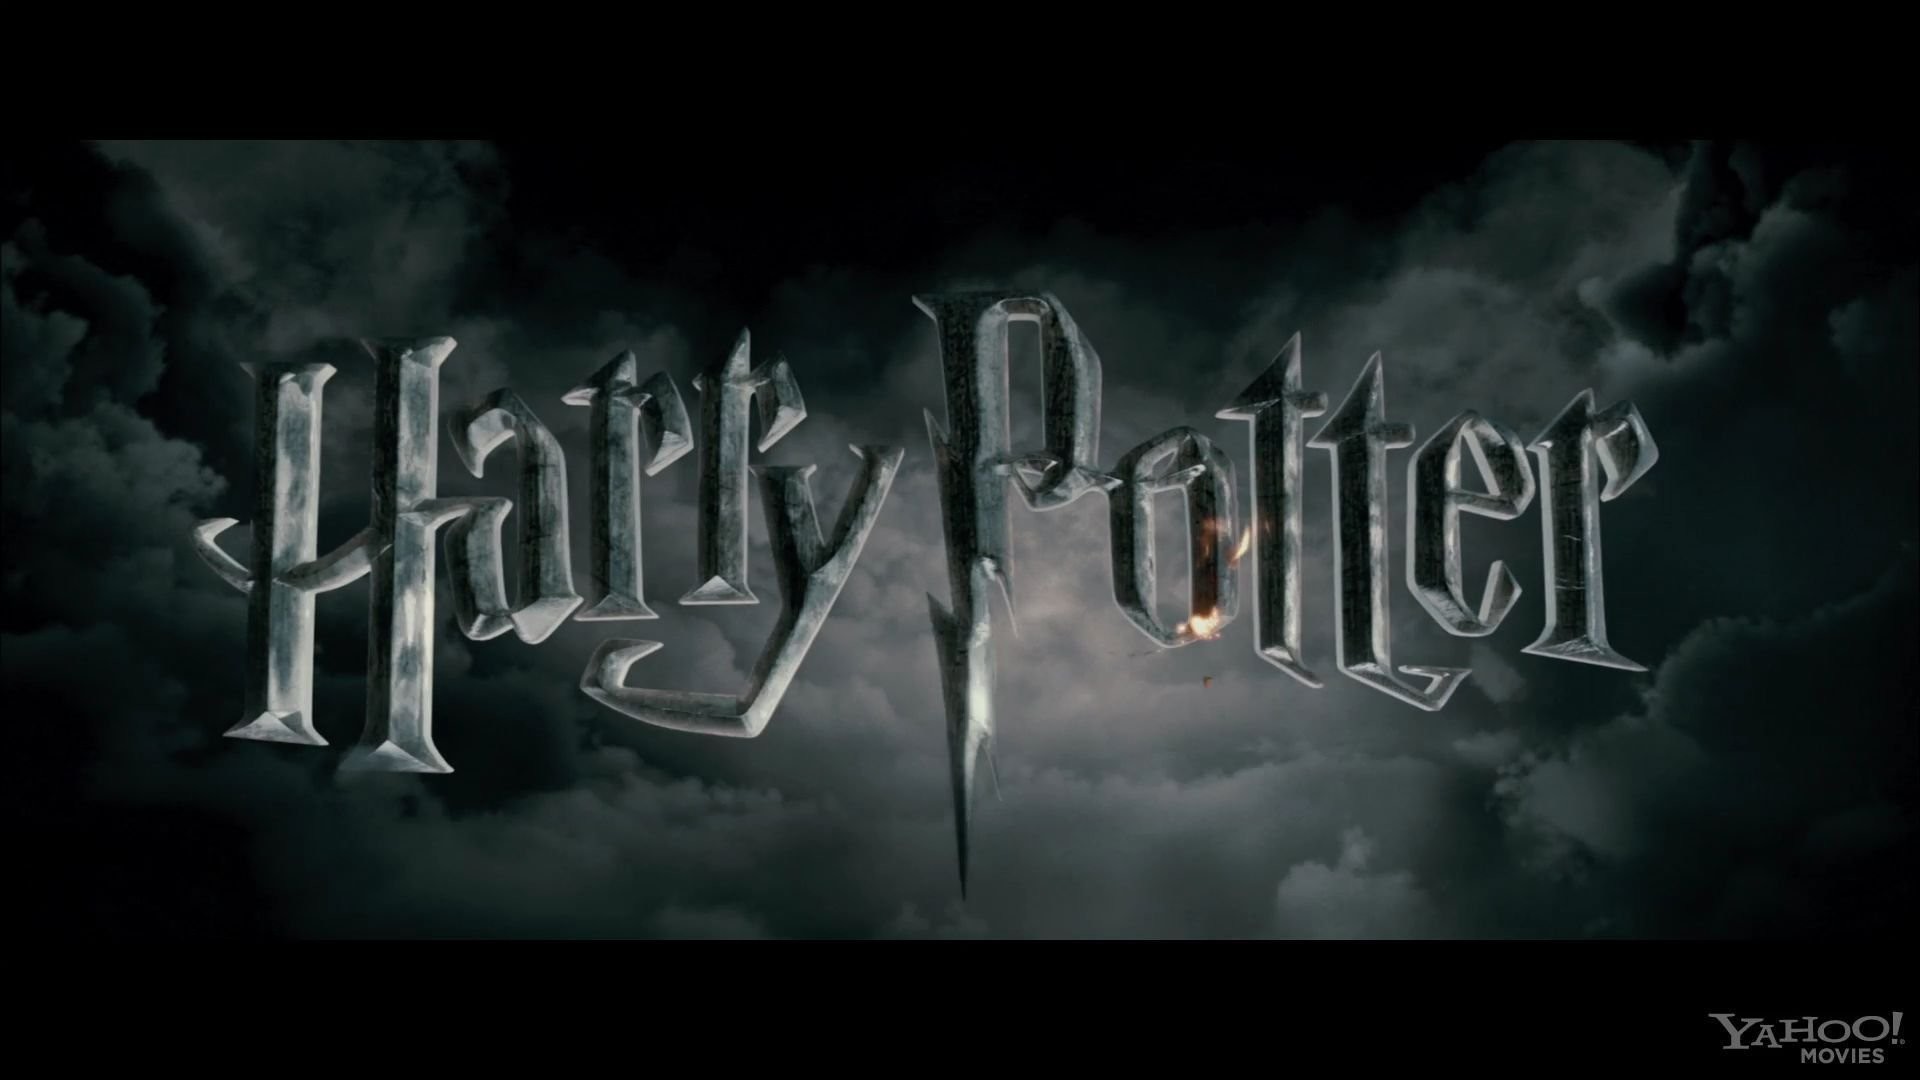 1920x1080 Harry Potter And The Deathly Hallows Logo